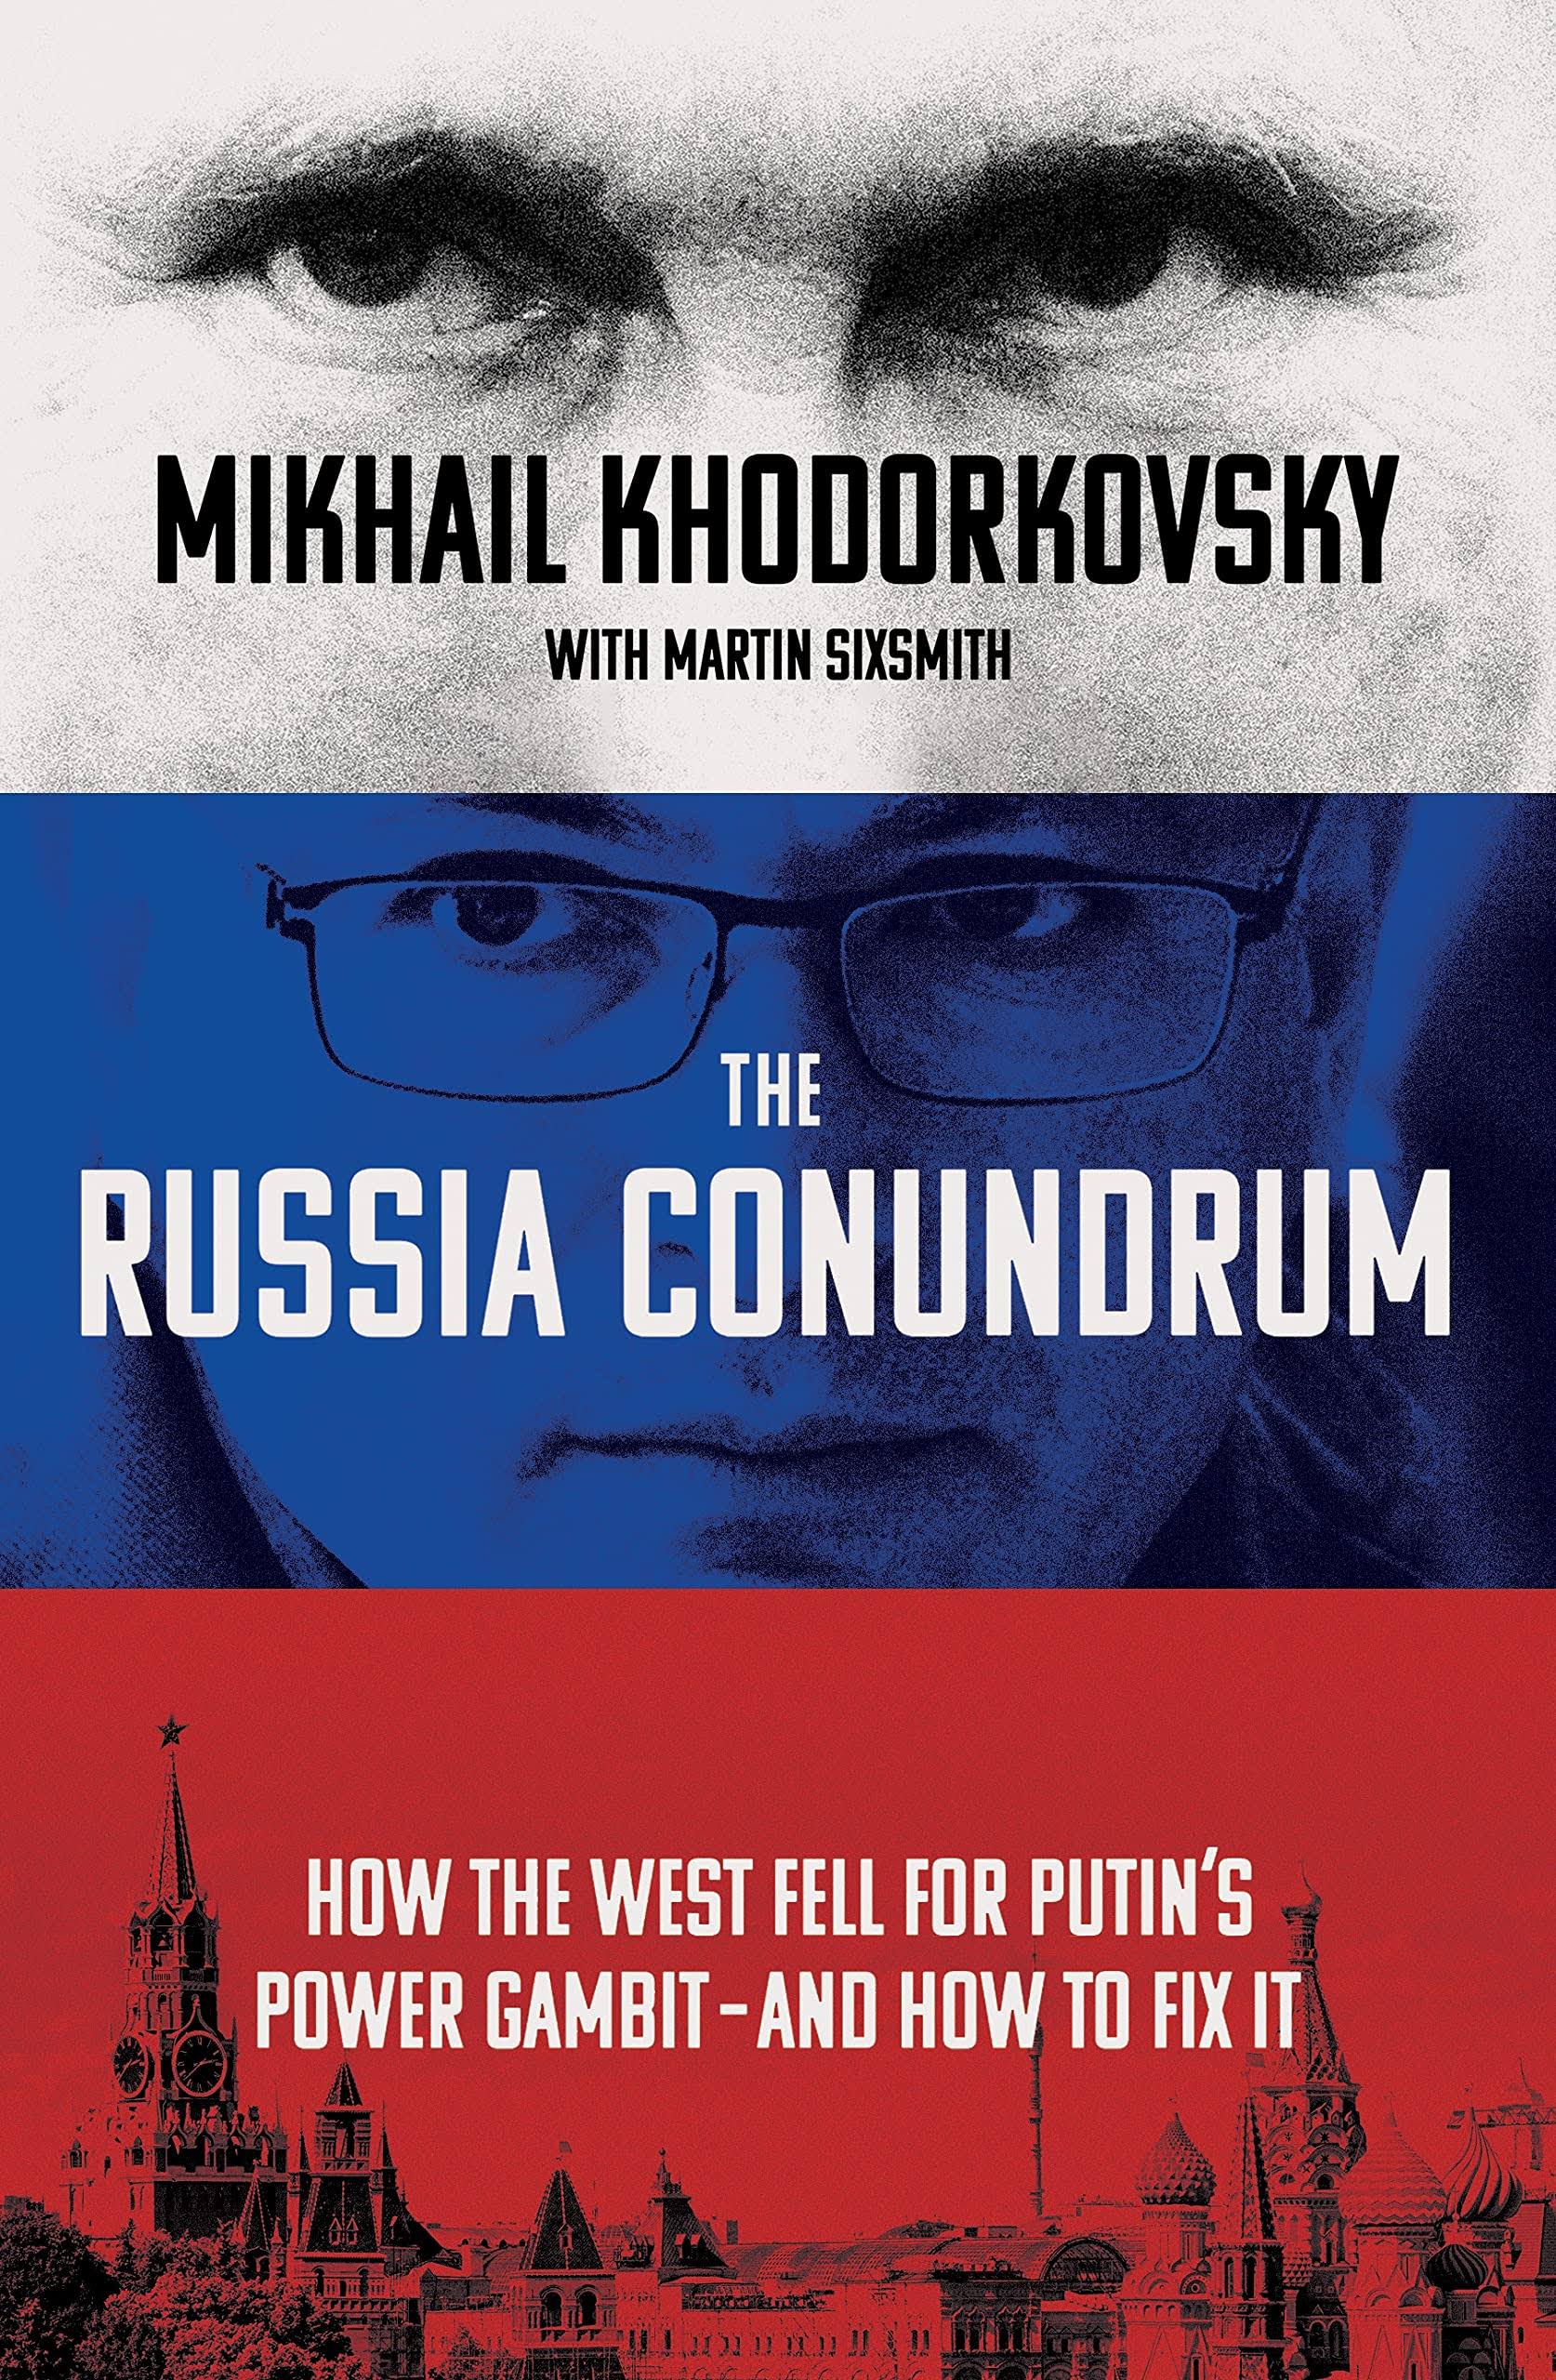 The Russia Conundrum: How the West Fell for Putin's Power Gambit - and How to Fix It [Book]